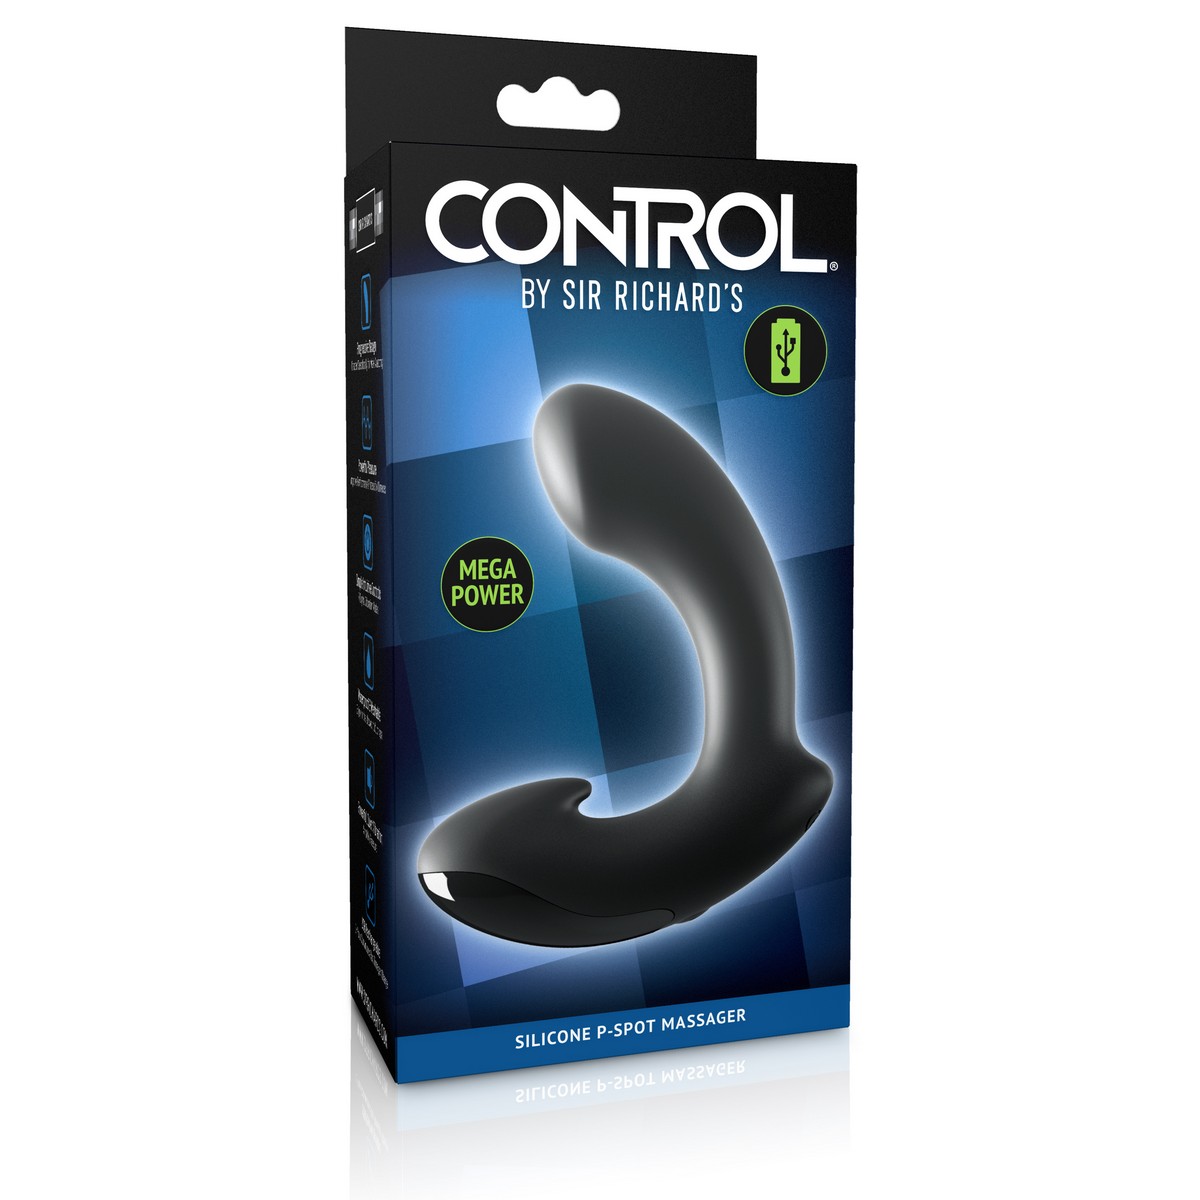   Sir Richard's Control Ultimate Silicone P-Spot Massager